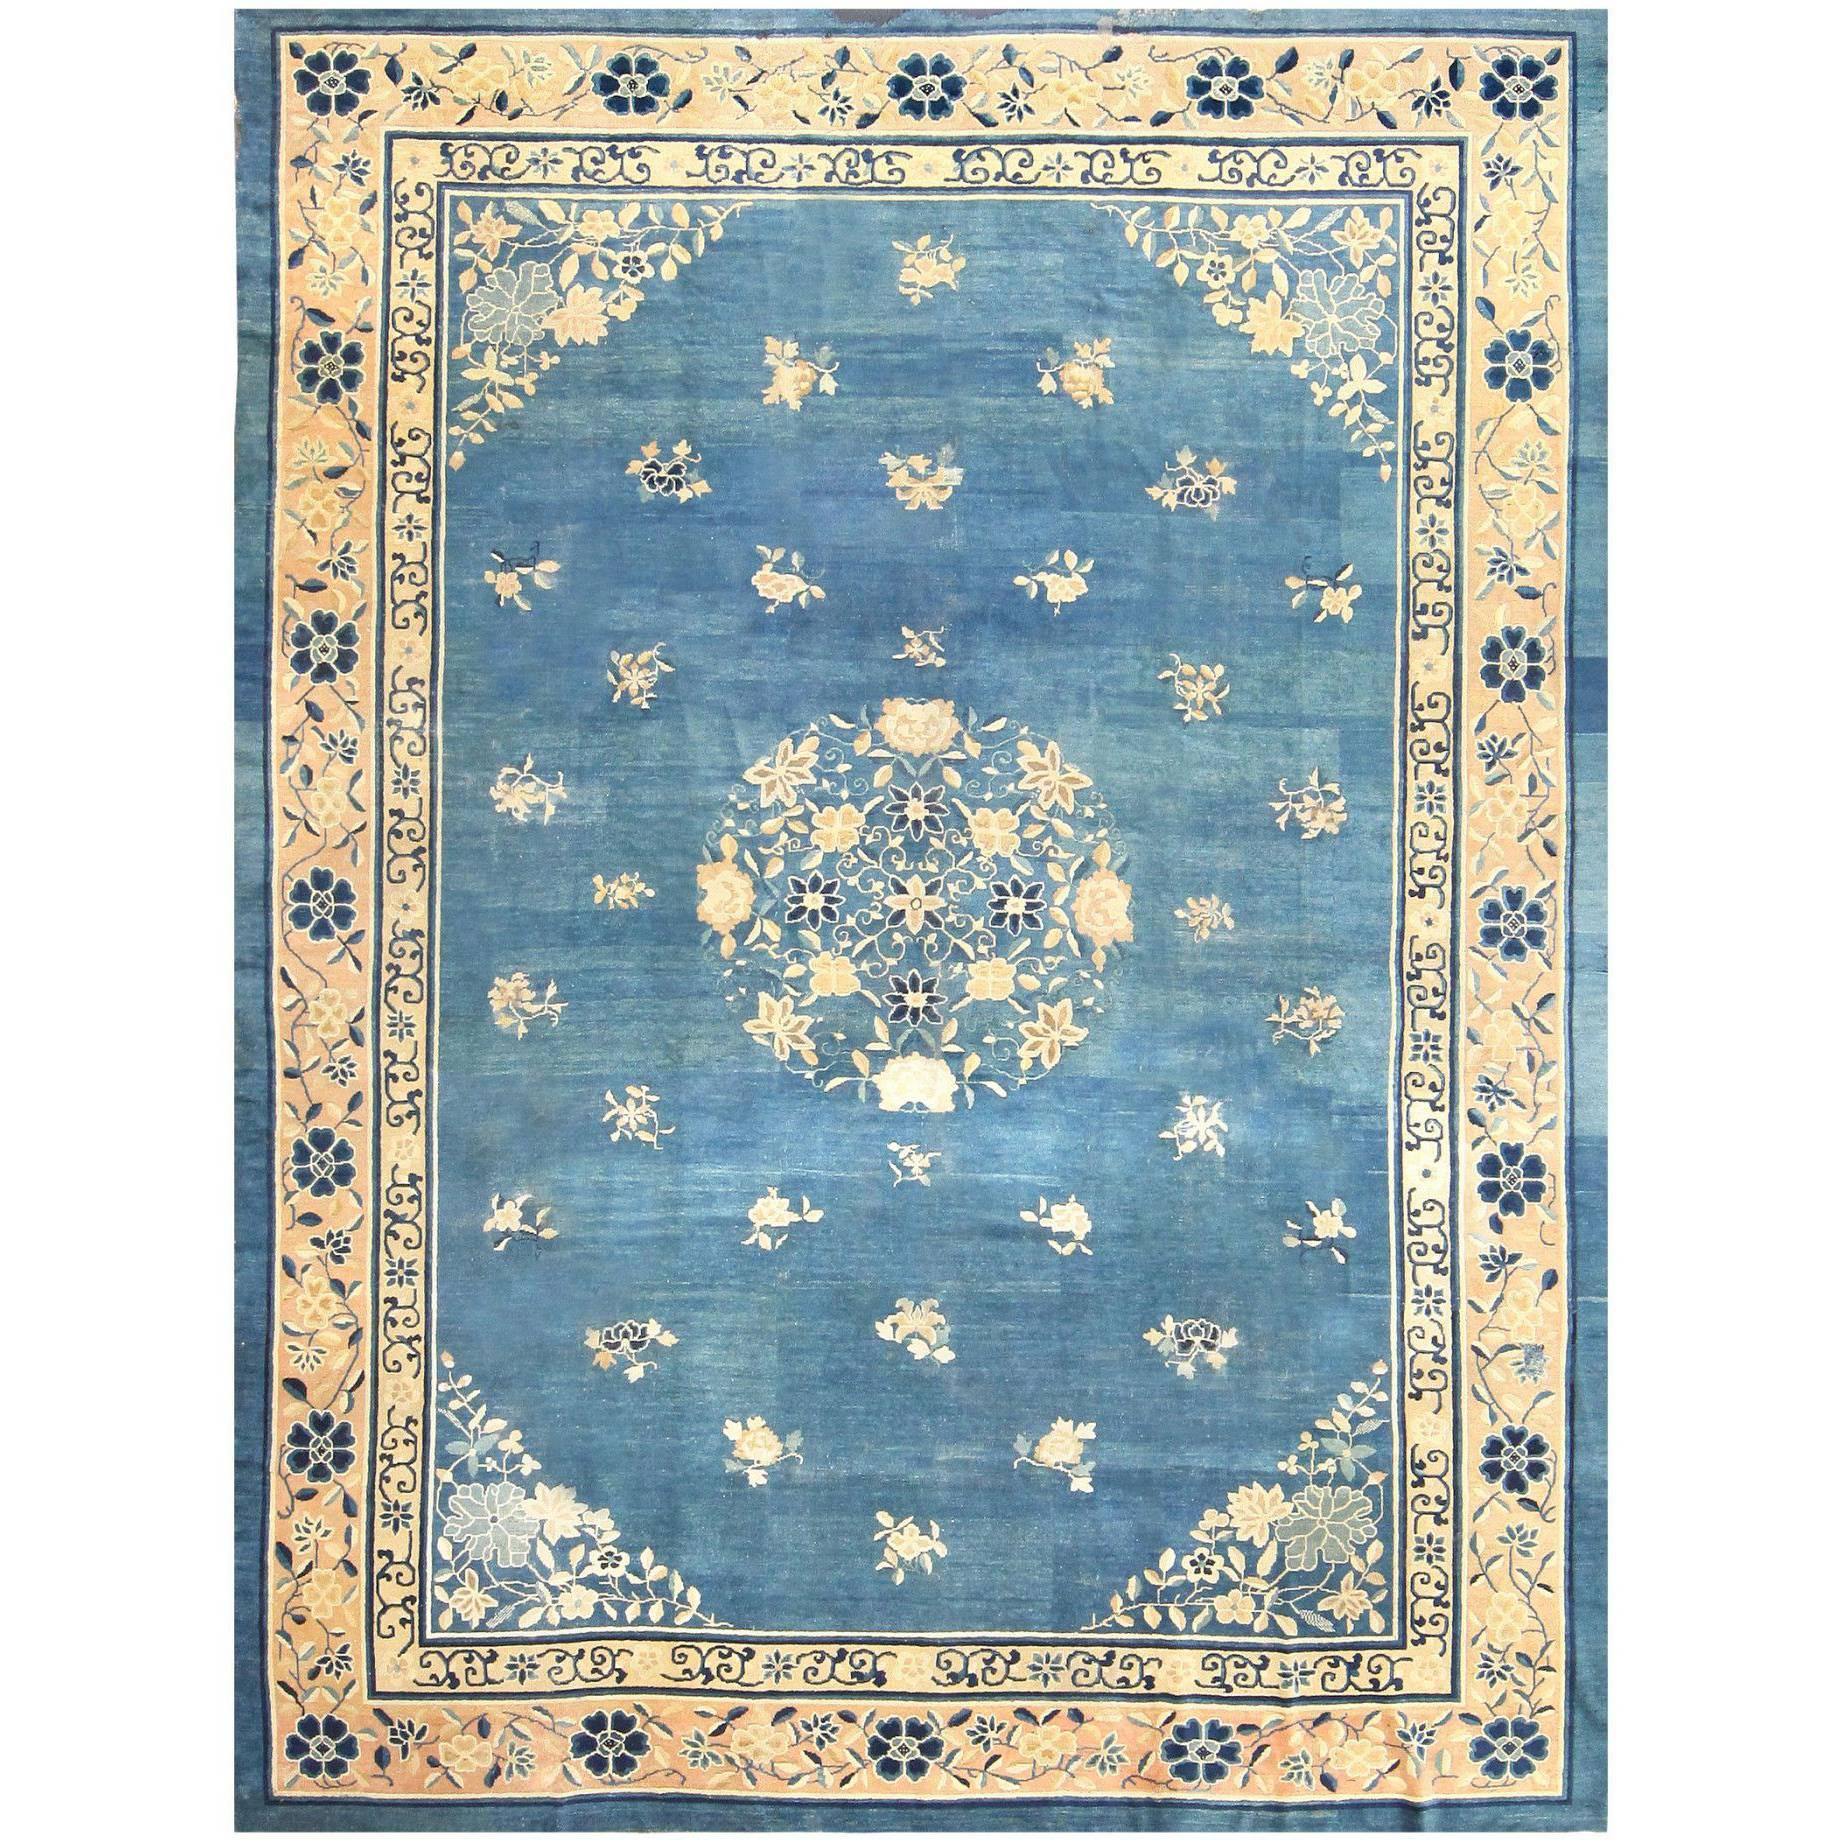 Antique Blue Chinese Rug